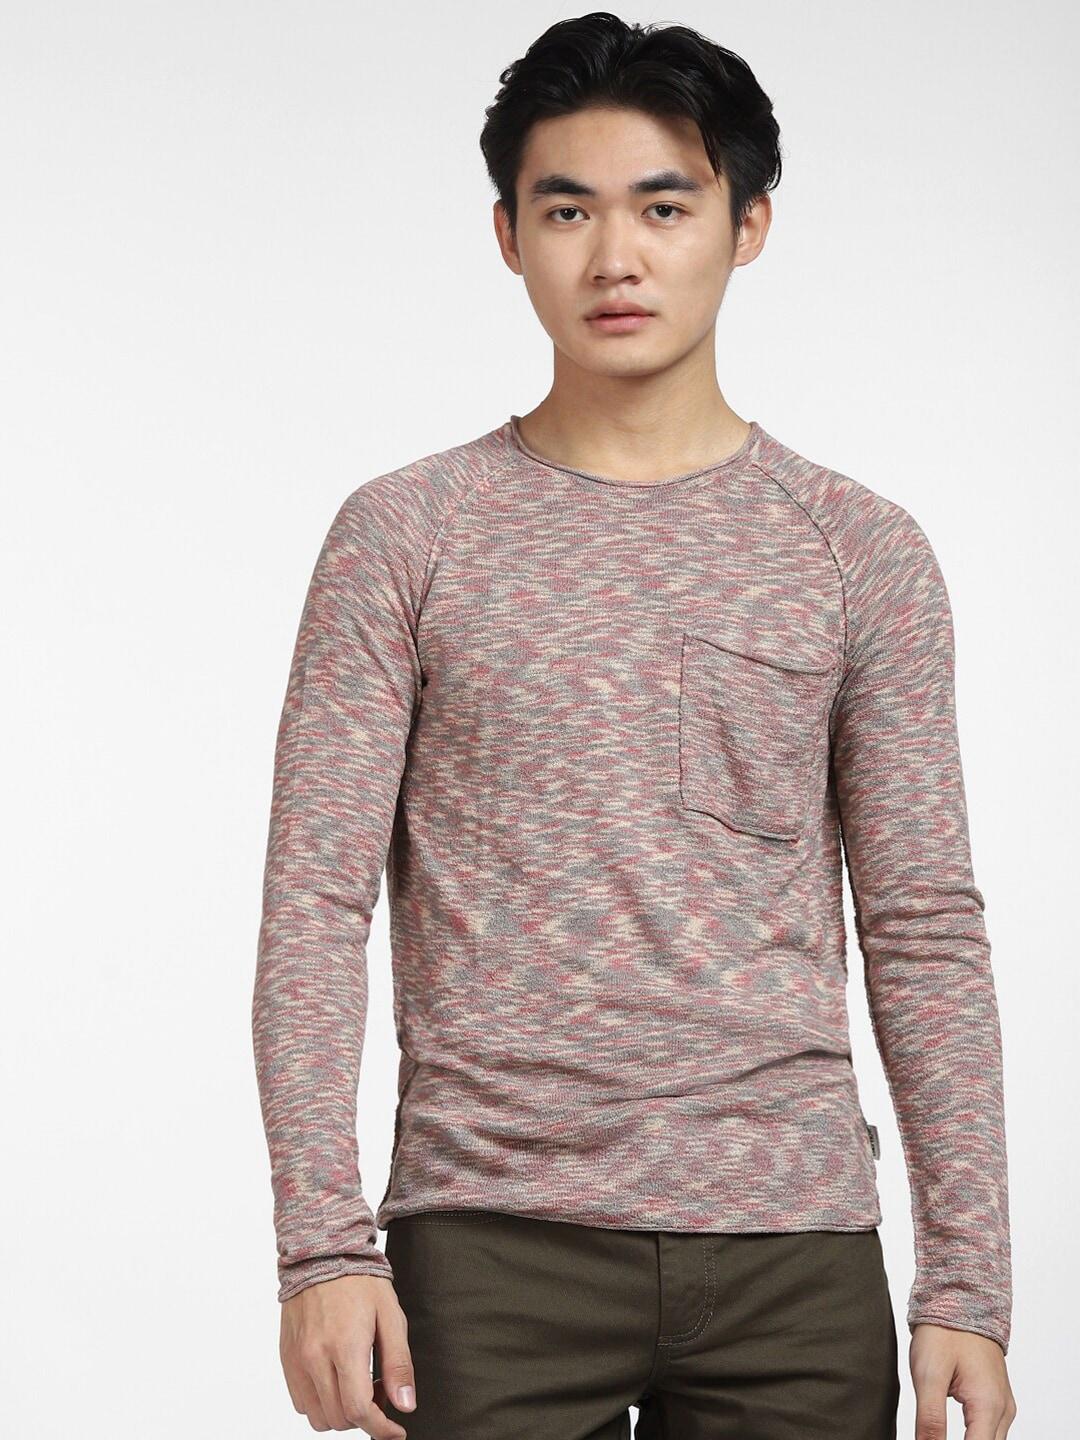 jack-&-jones-men-mauve-&-off-white-abstract-printed-pullover-sweater